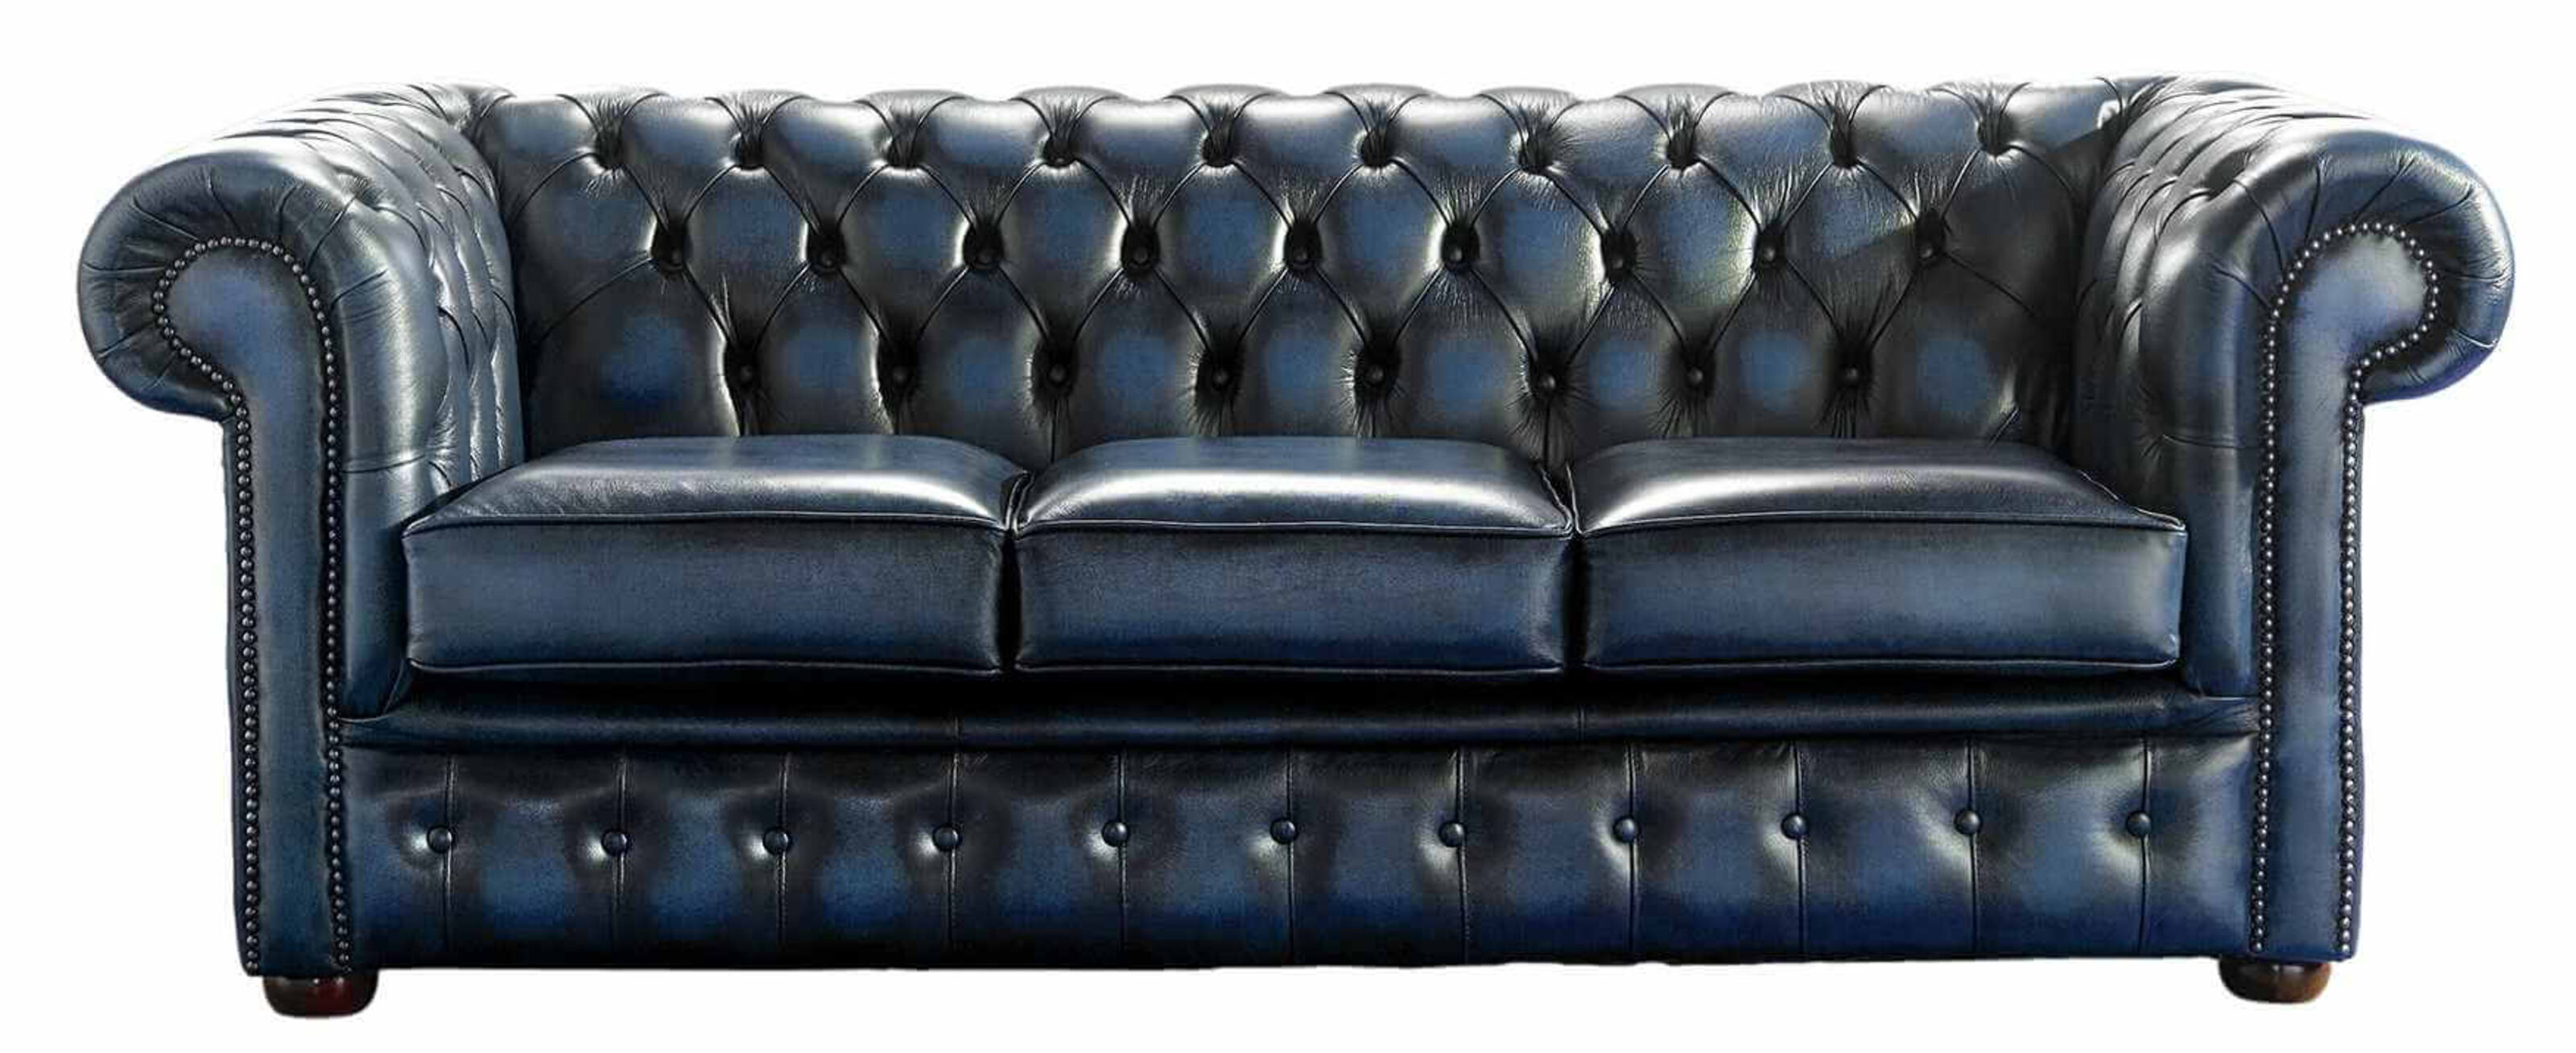 Dive into Elegance Blue Chesterfield Sofas  %Post Title